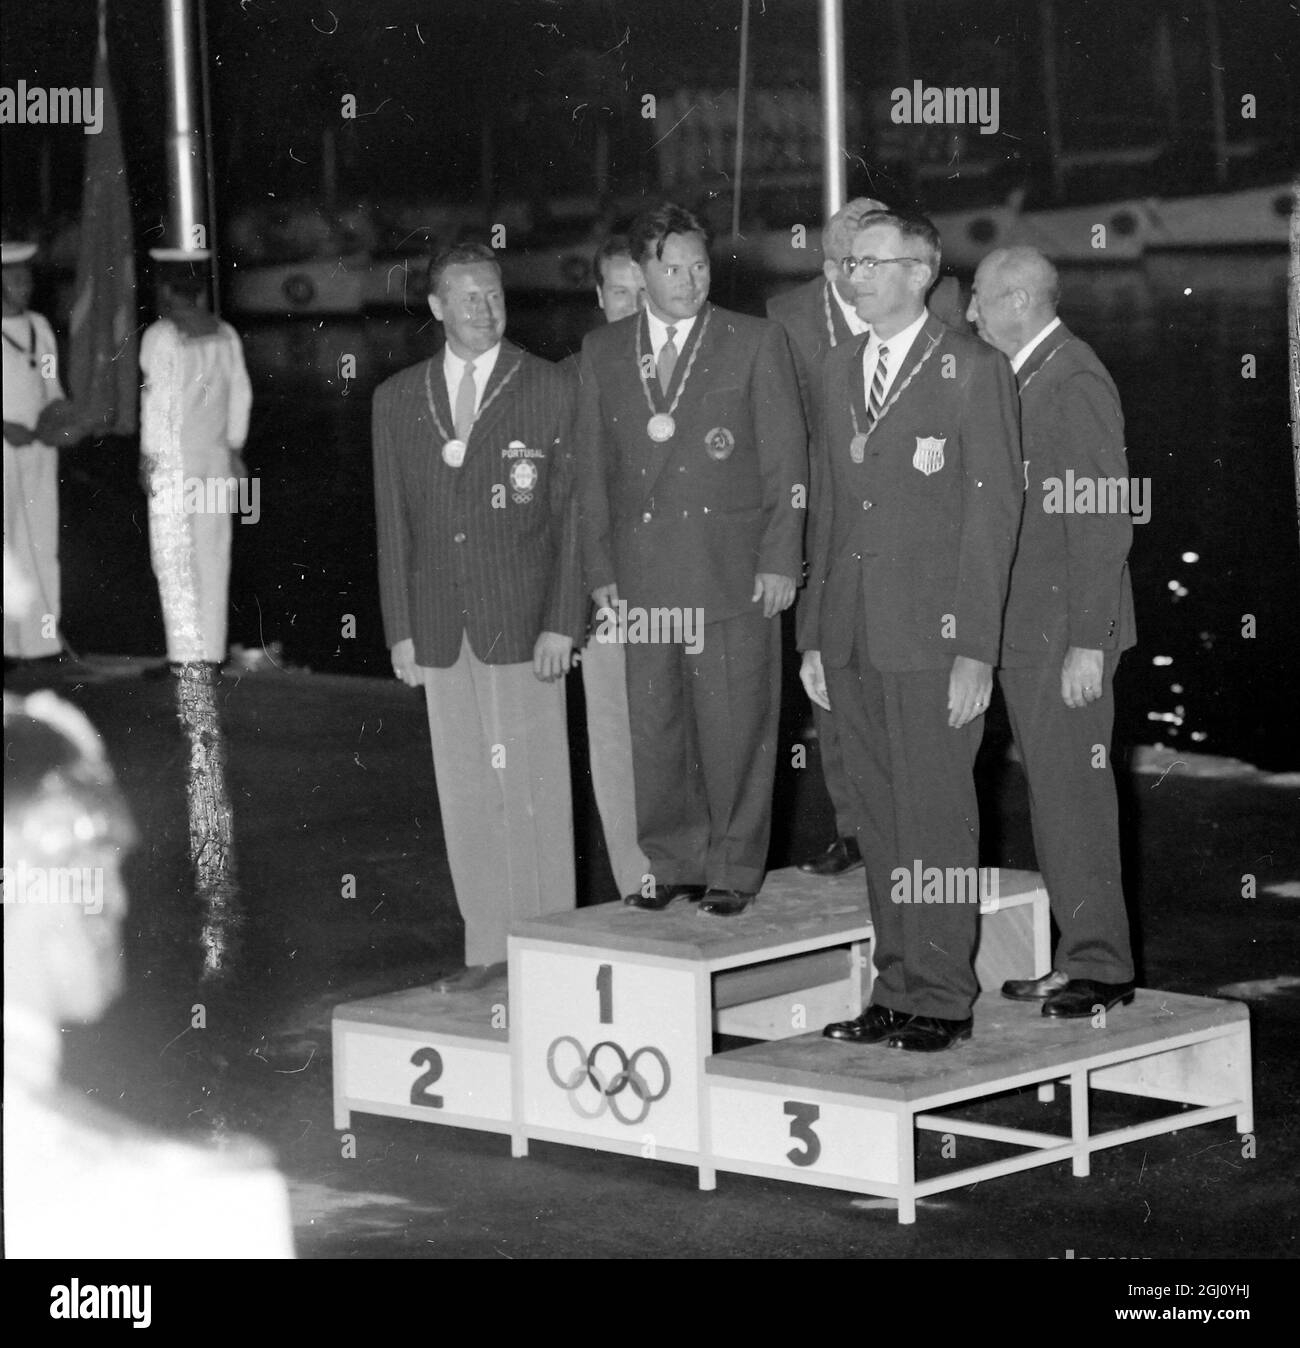 OLYMPIC GAME YACHTING STAR CLASS FINAL WINNERS ON PODIUM VIND PRESE 8 SEPTEMBER 1960 Stock Photo